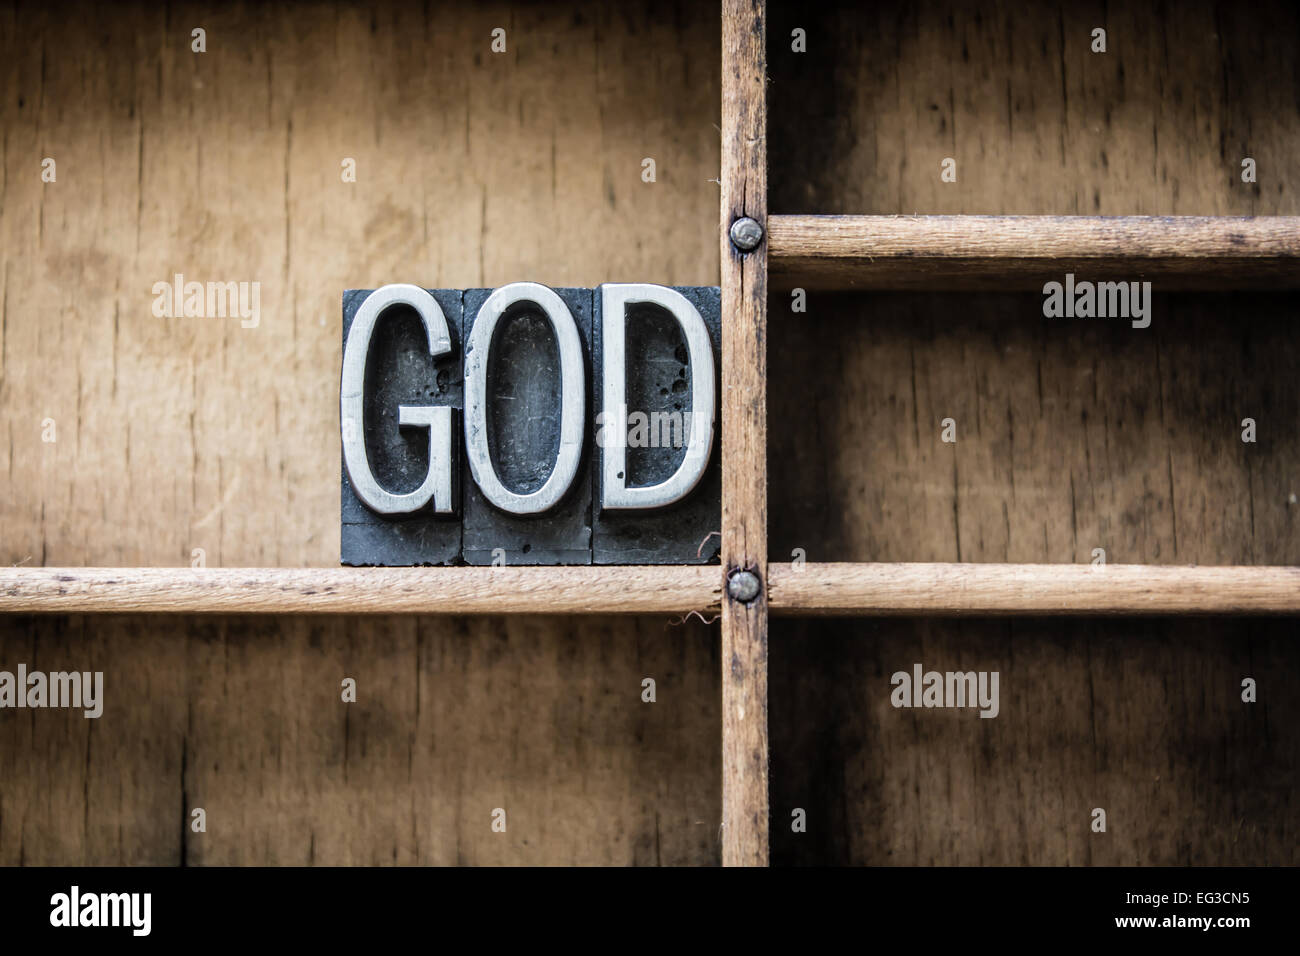 The name 'GOD' written in vintage metal letterpress type sitting in a wooden drawer. Stock Photo